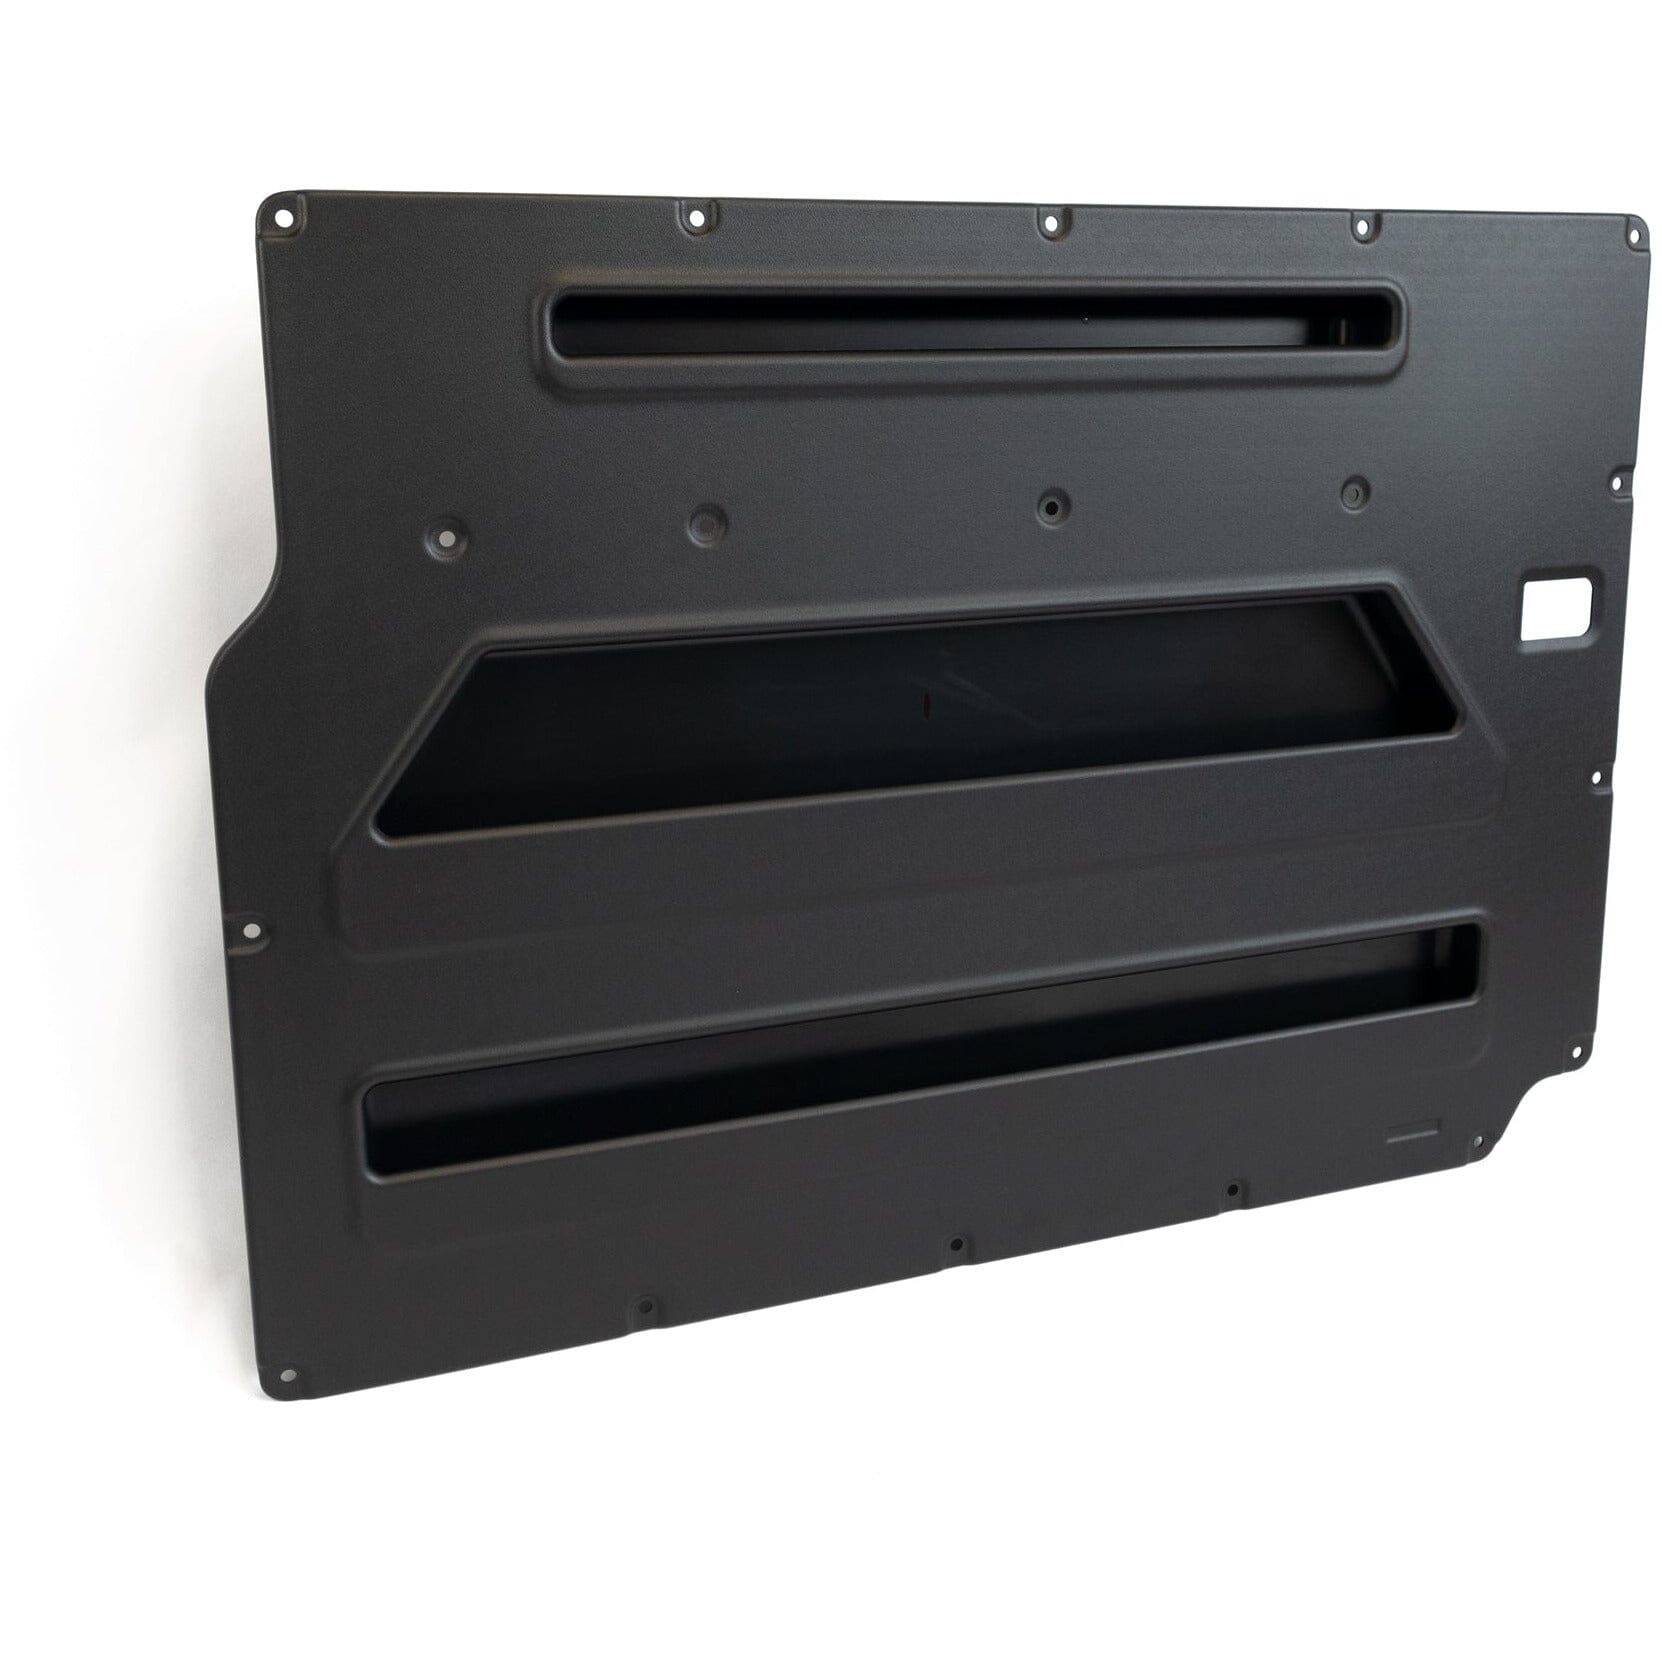 Left + Right Bundle - VW T4 DoorStores - Maximise Your VW's Storage Space with a Pair of DoorStores Designed by Kiravans 